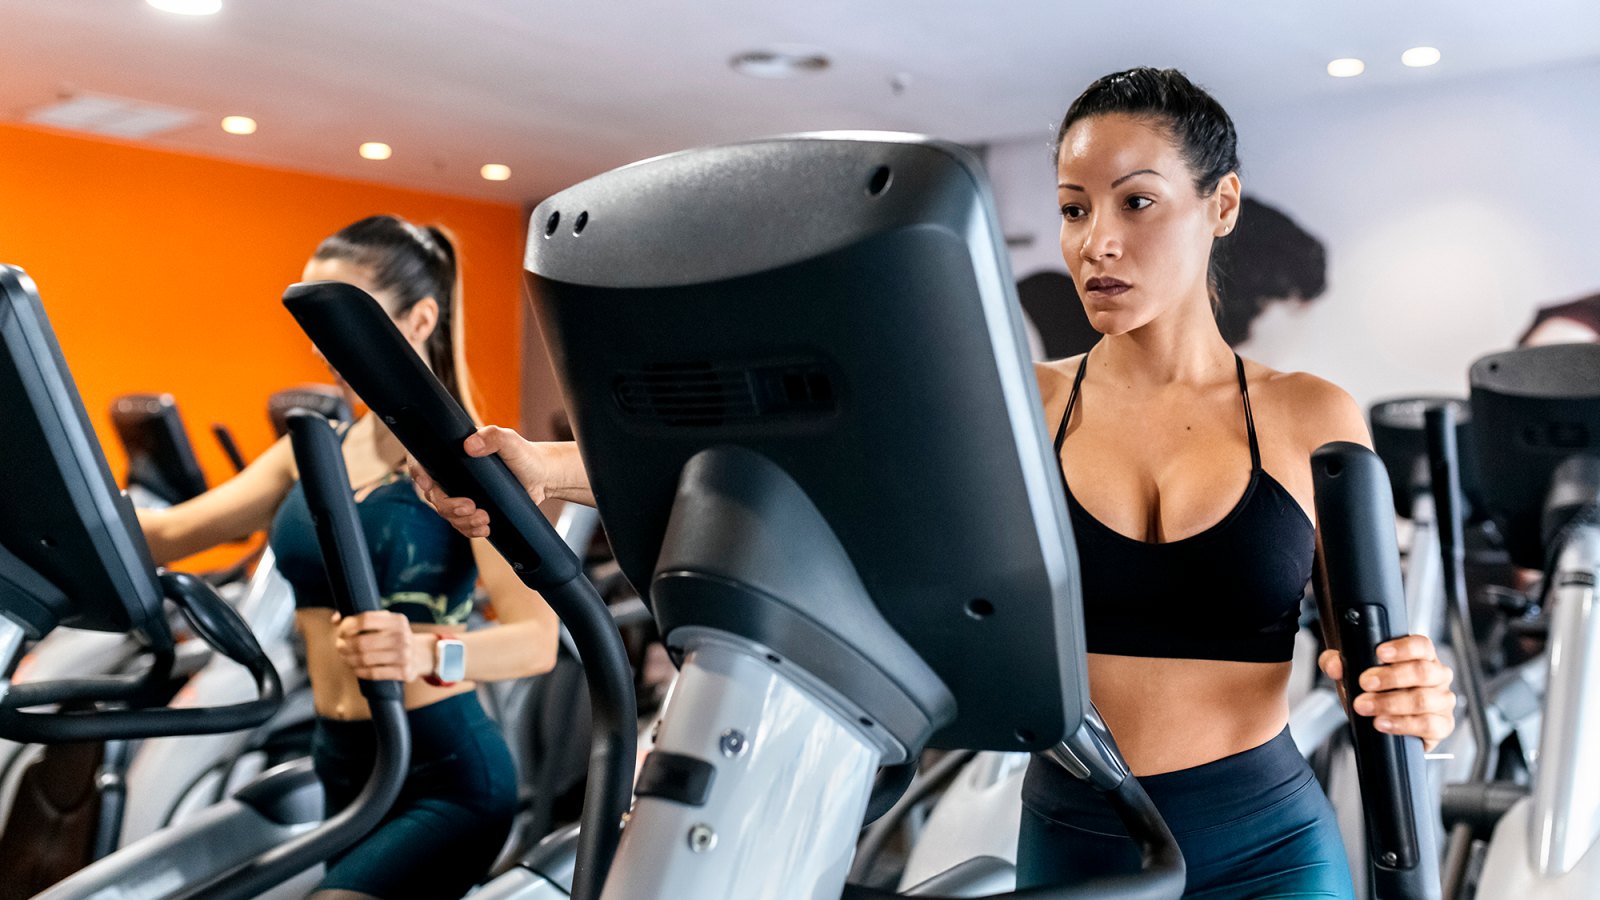 two women working out in gym using a elliptical